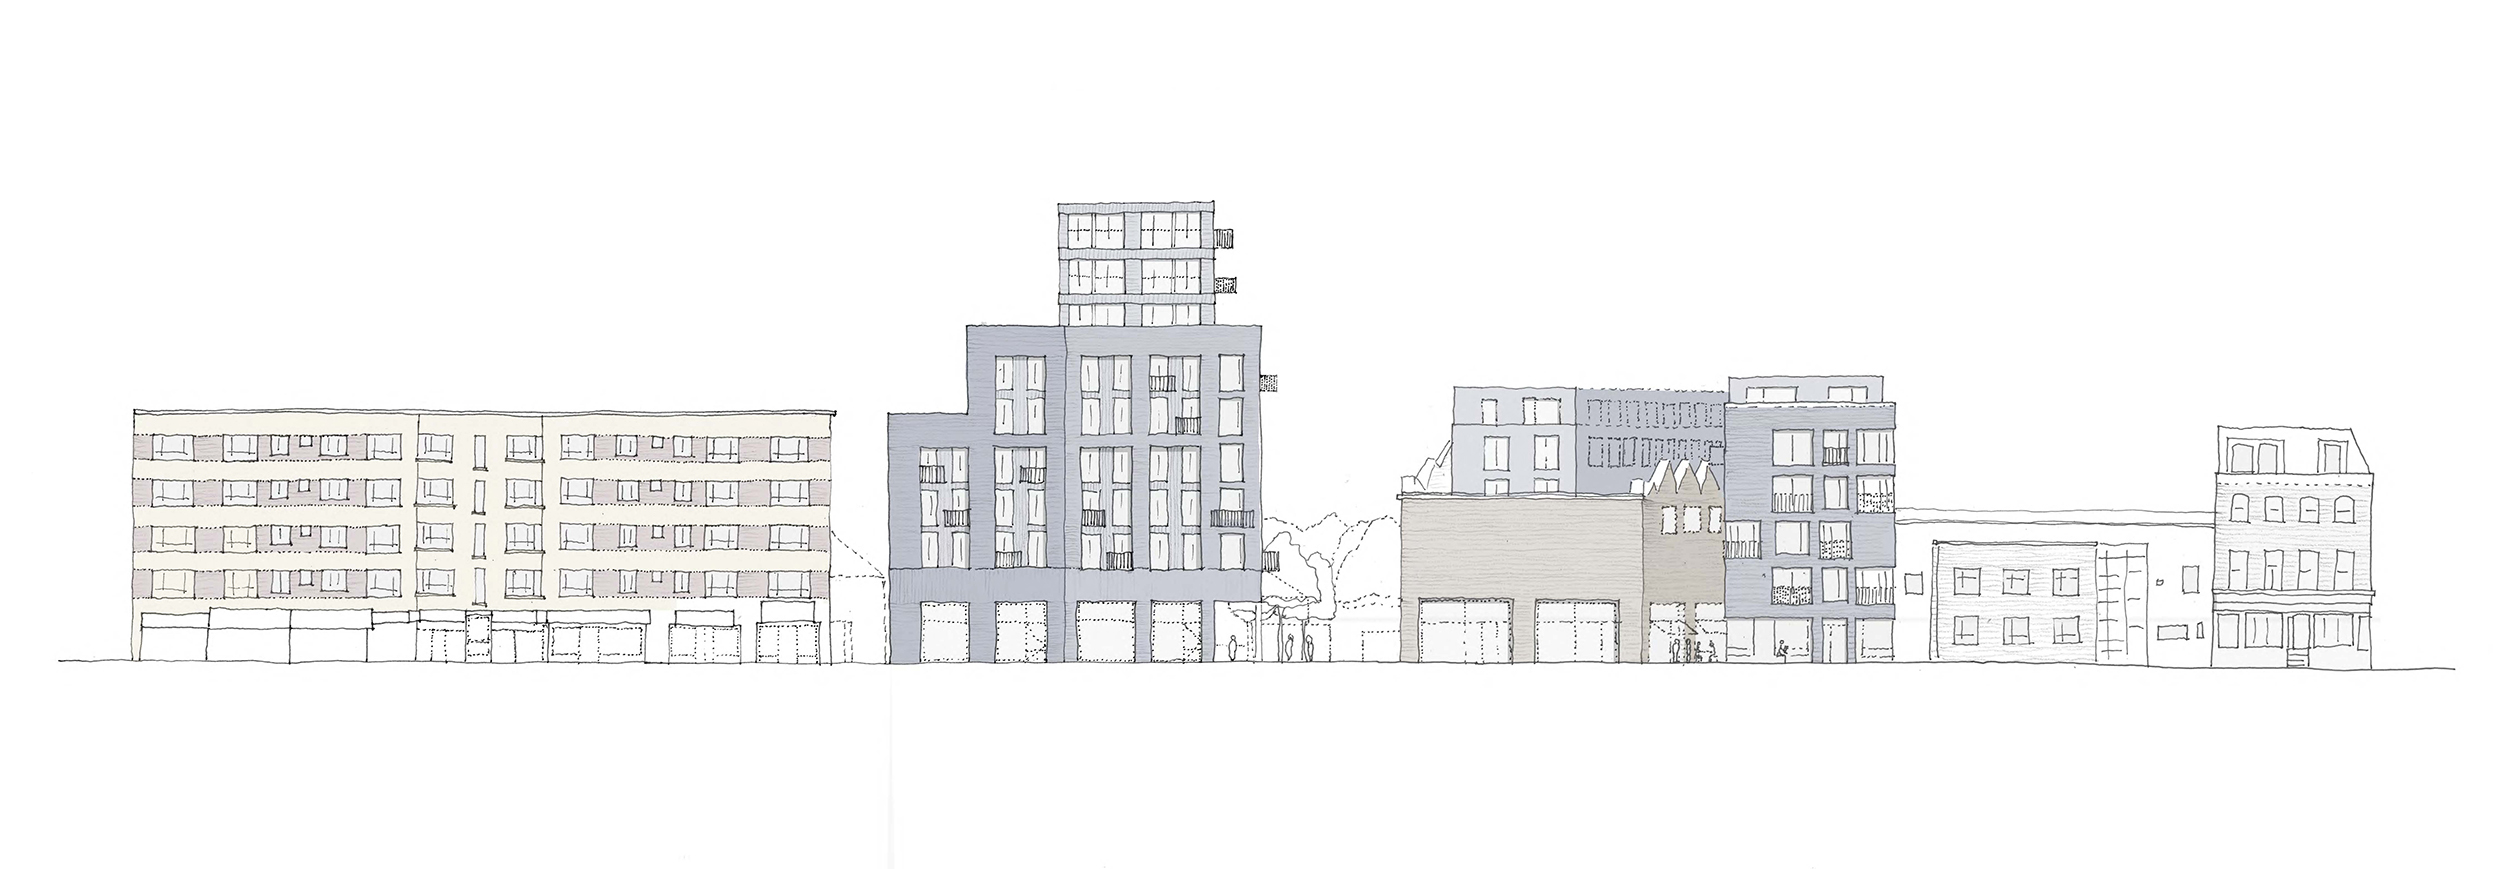 Elevation of new buildings